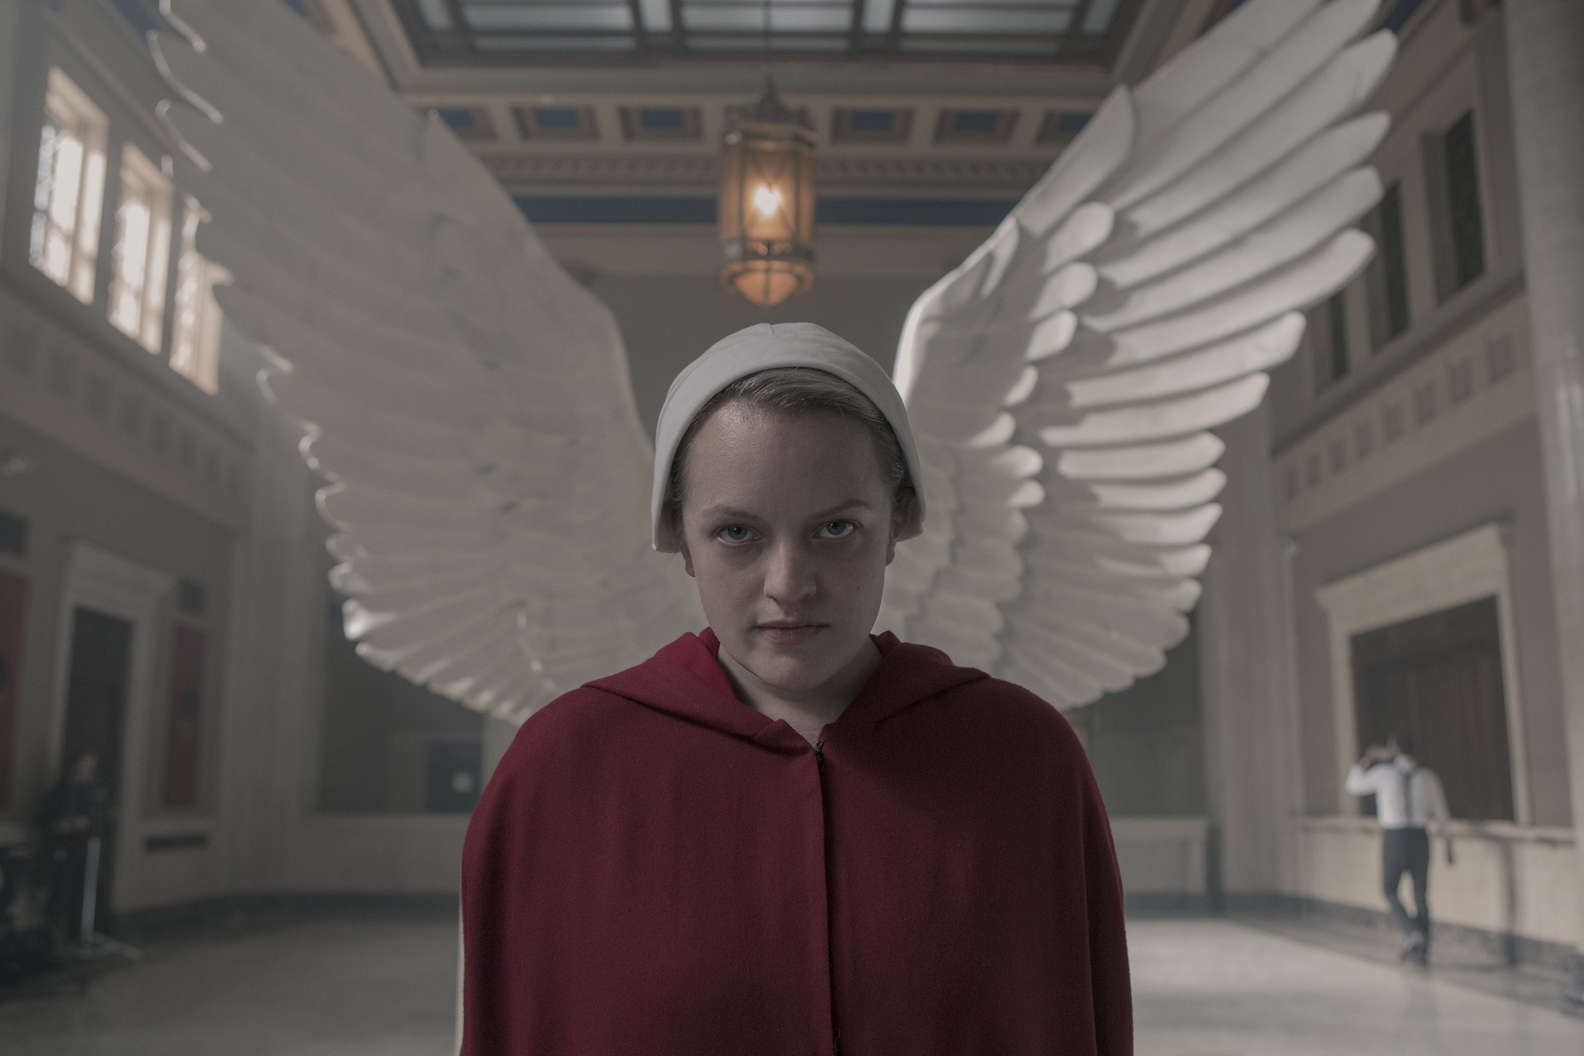 Handmaid's Tale Season 4 Release Date: Everything we know about the Upcoming Season